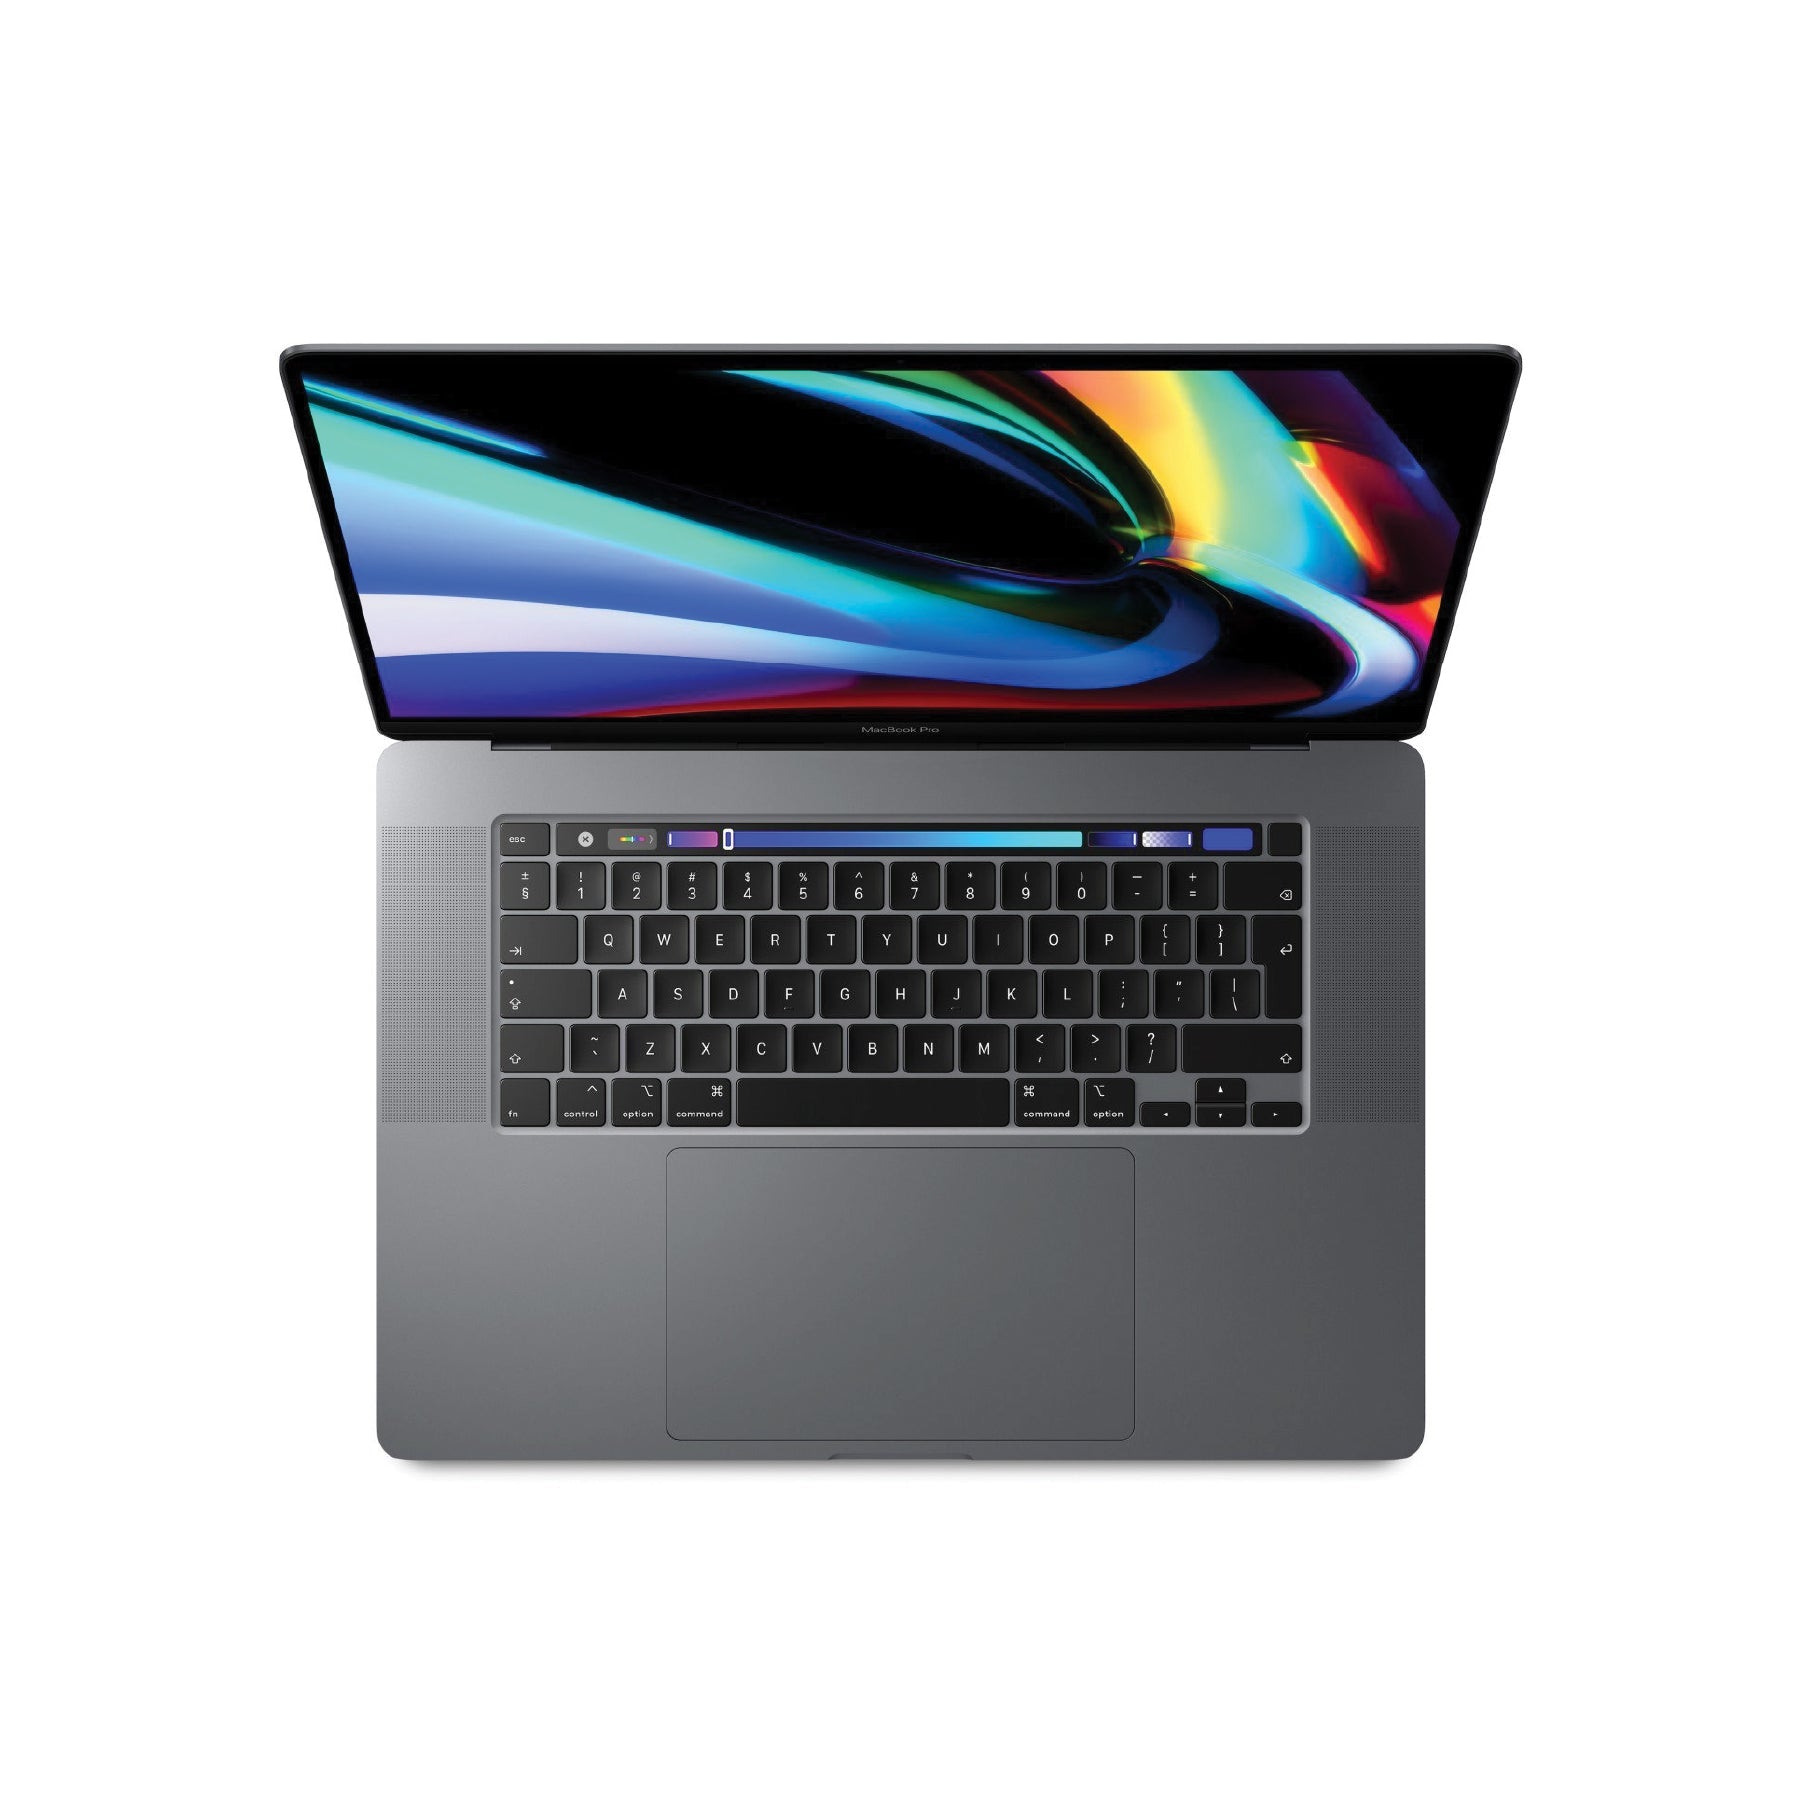 MacBook Pro (16-inch, 2.3GHz CPU, Intel Core i9, 2019) 1TB Storage - Space Grey (Better) - iStore Pre-owned